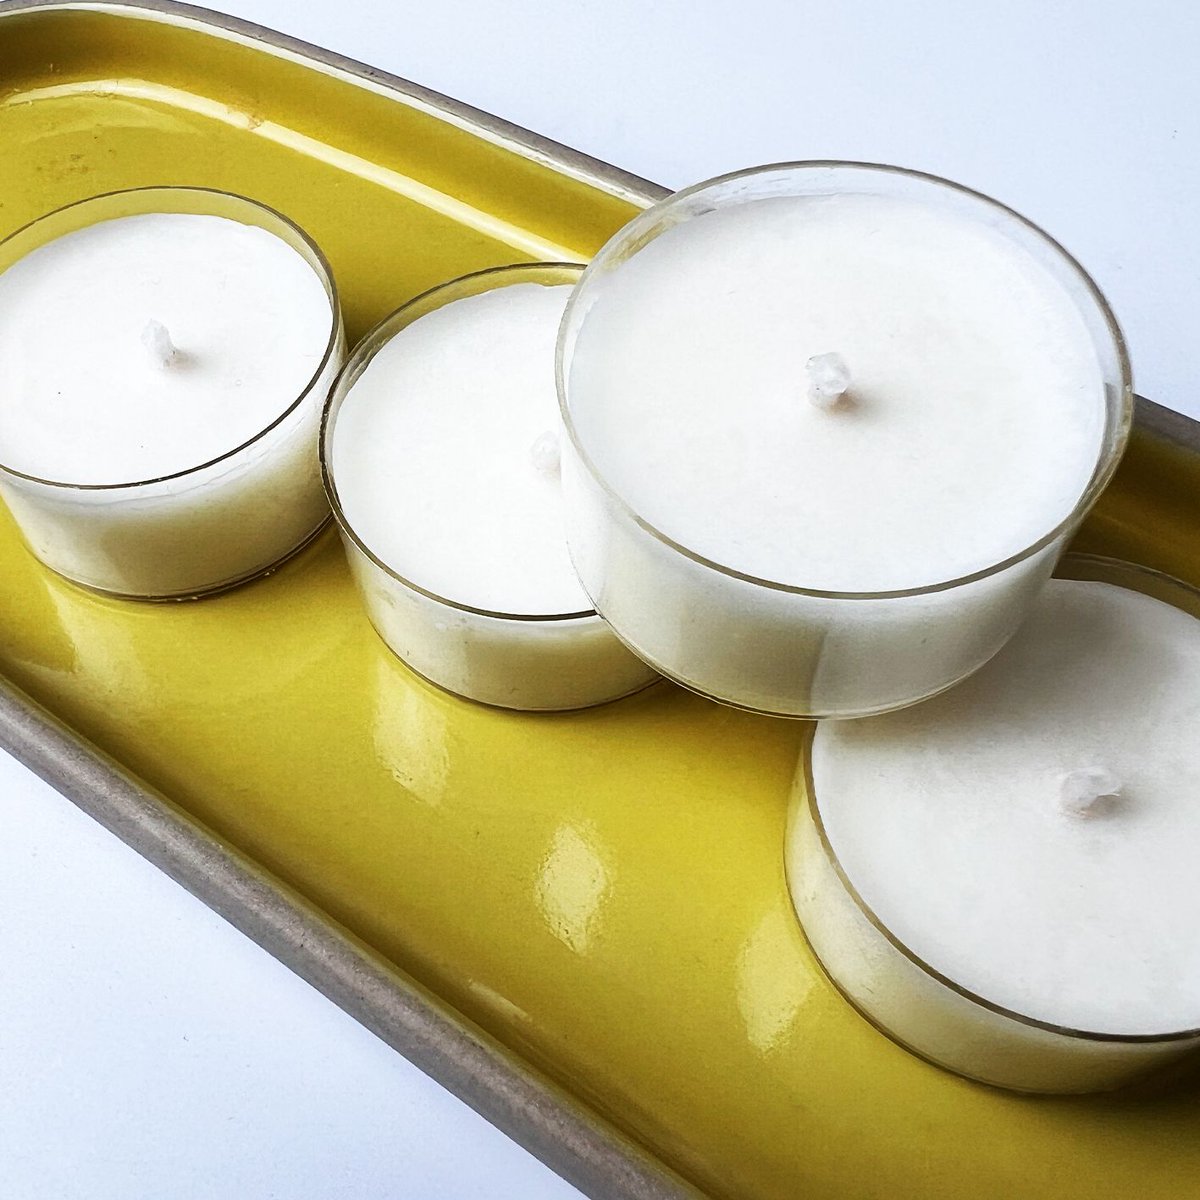 You may have noticed a couple of new tealights have joined our website this week. Fir Tree is one of those scents that evokes all the memories of a pine forest, whereas Cinnamon Buns gives the comforting aromas of freshly baked, warm, spicy bakes. buff.ly/43W8BYy